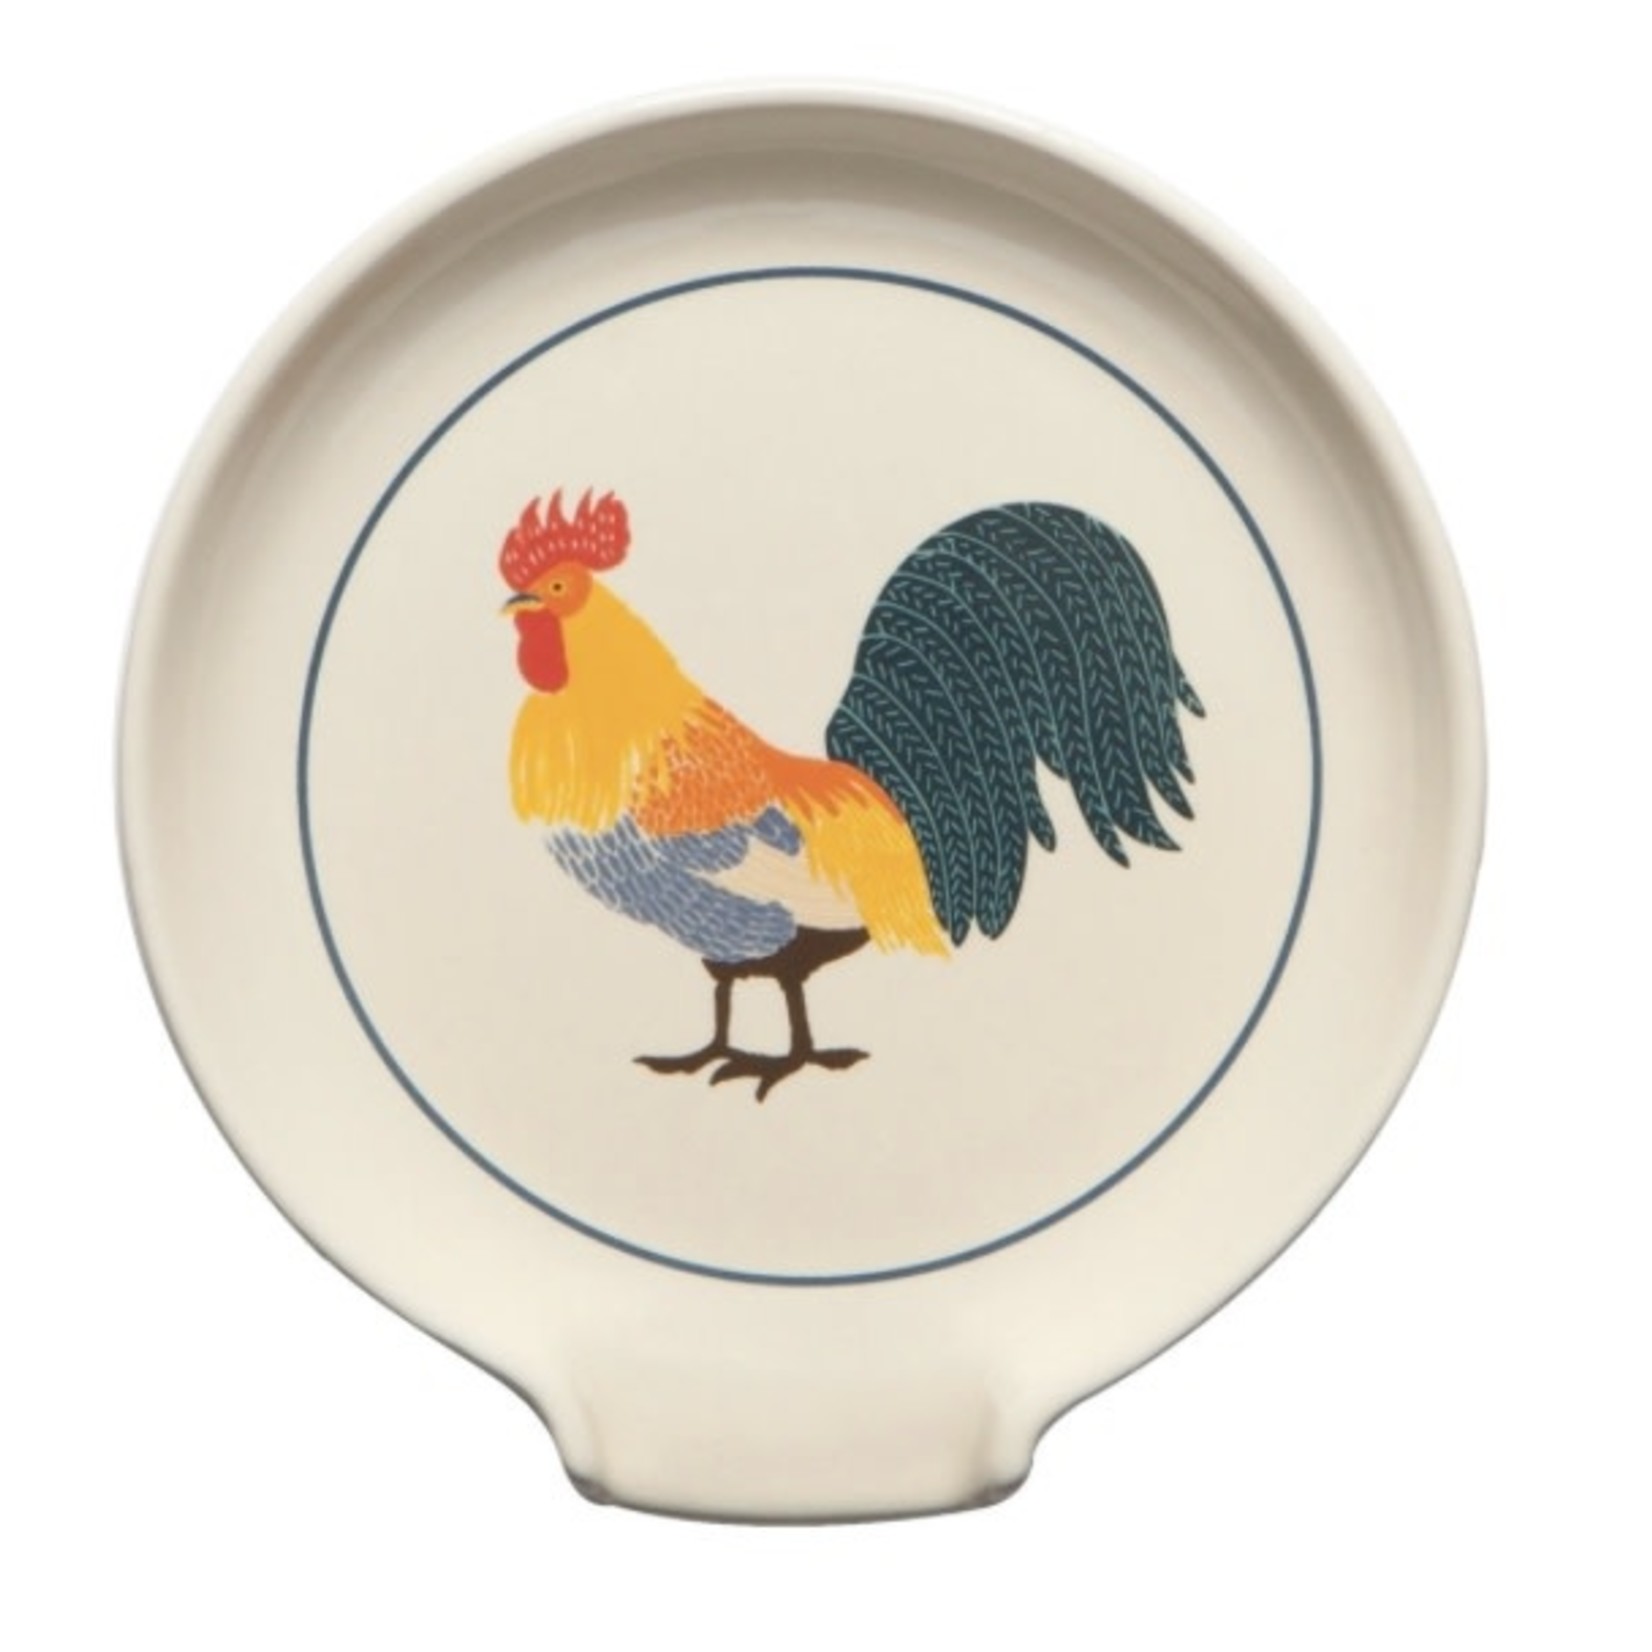 DANICA DANICA Spoon Rest - Rooster Francaise